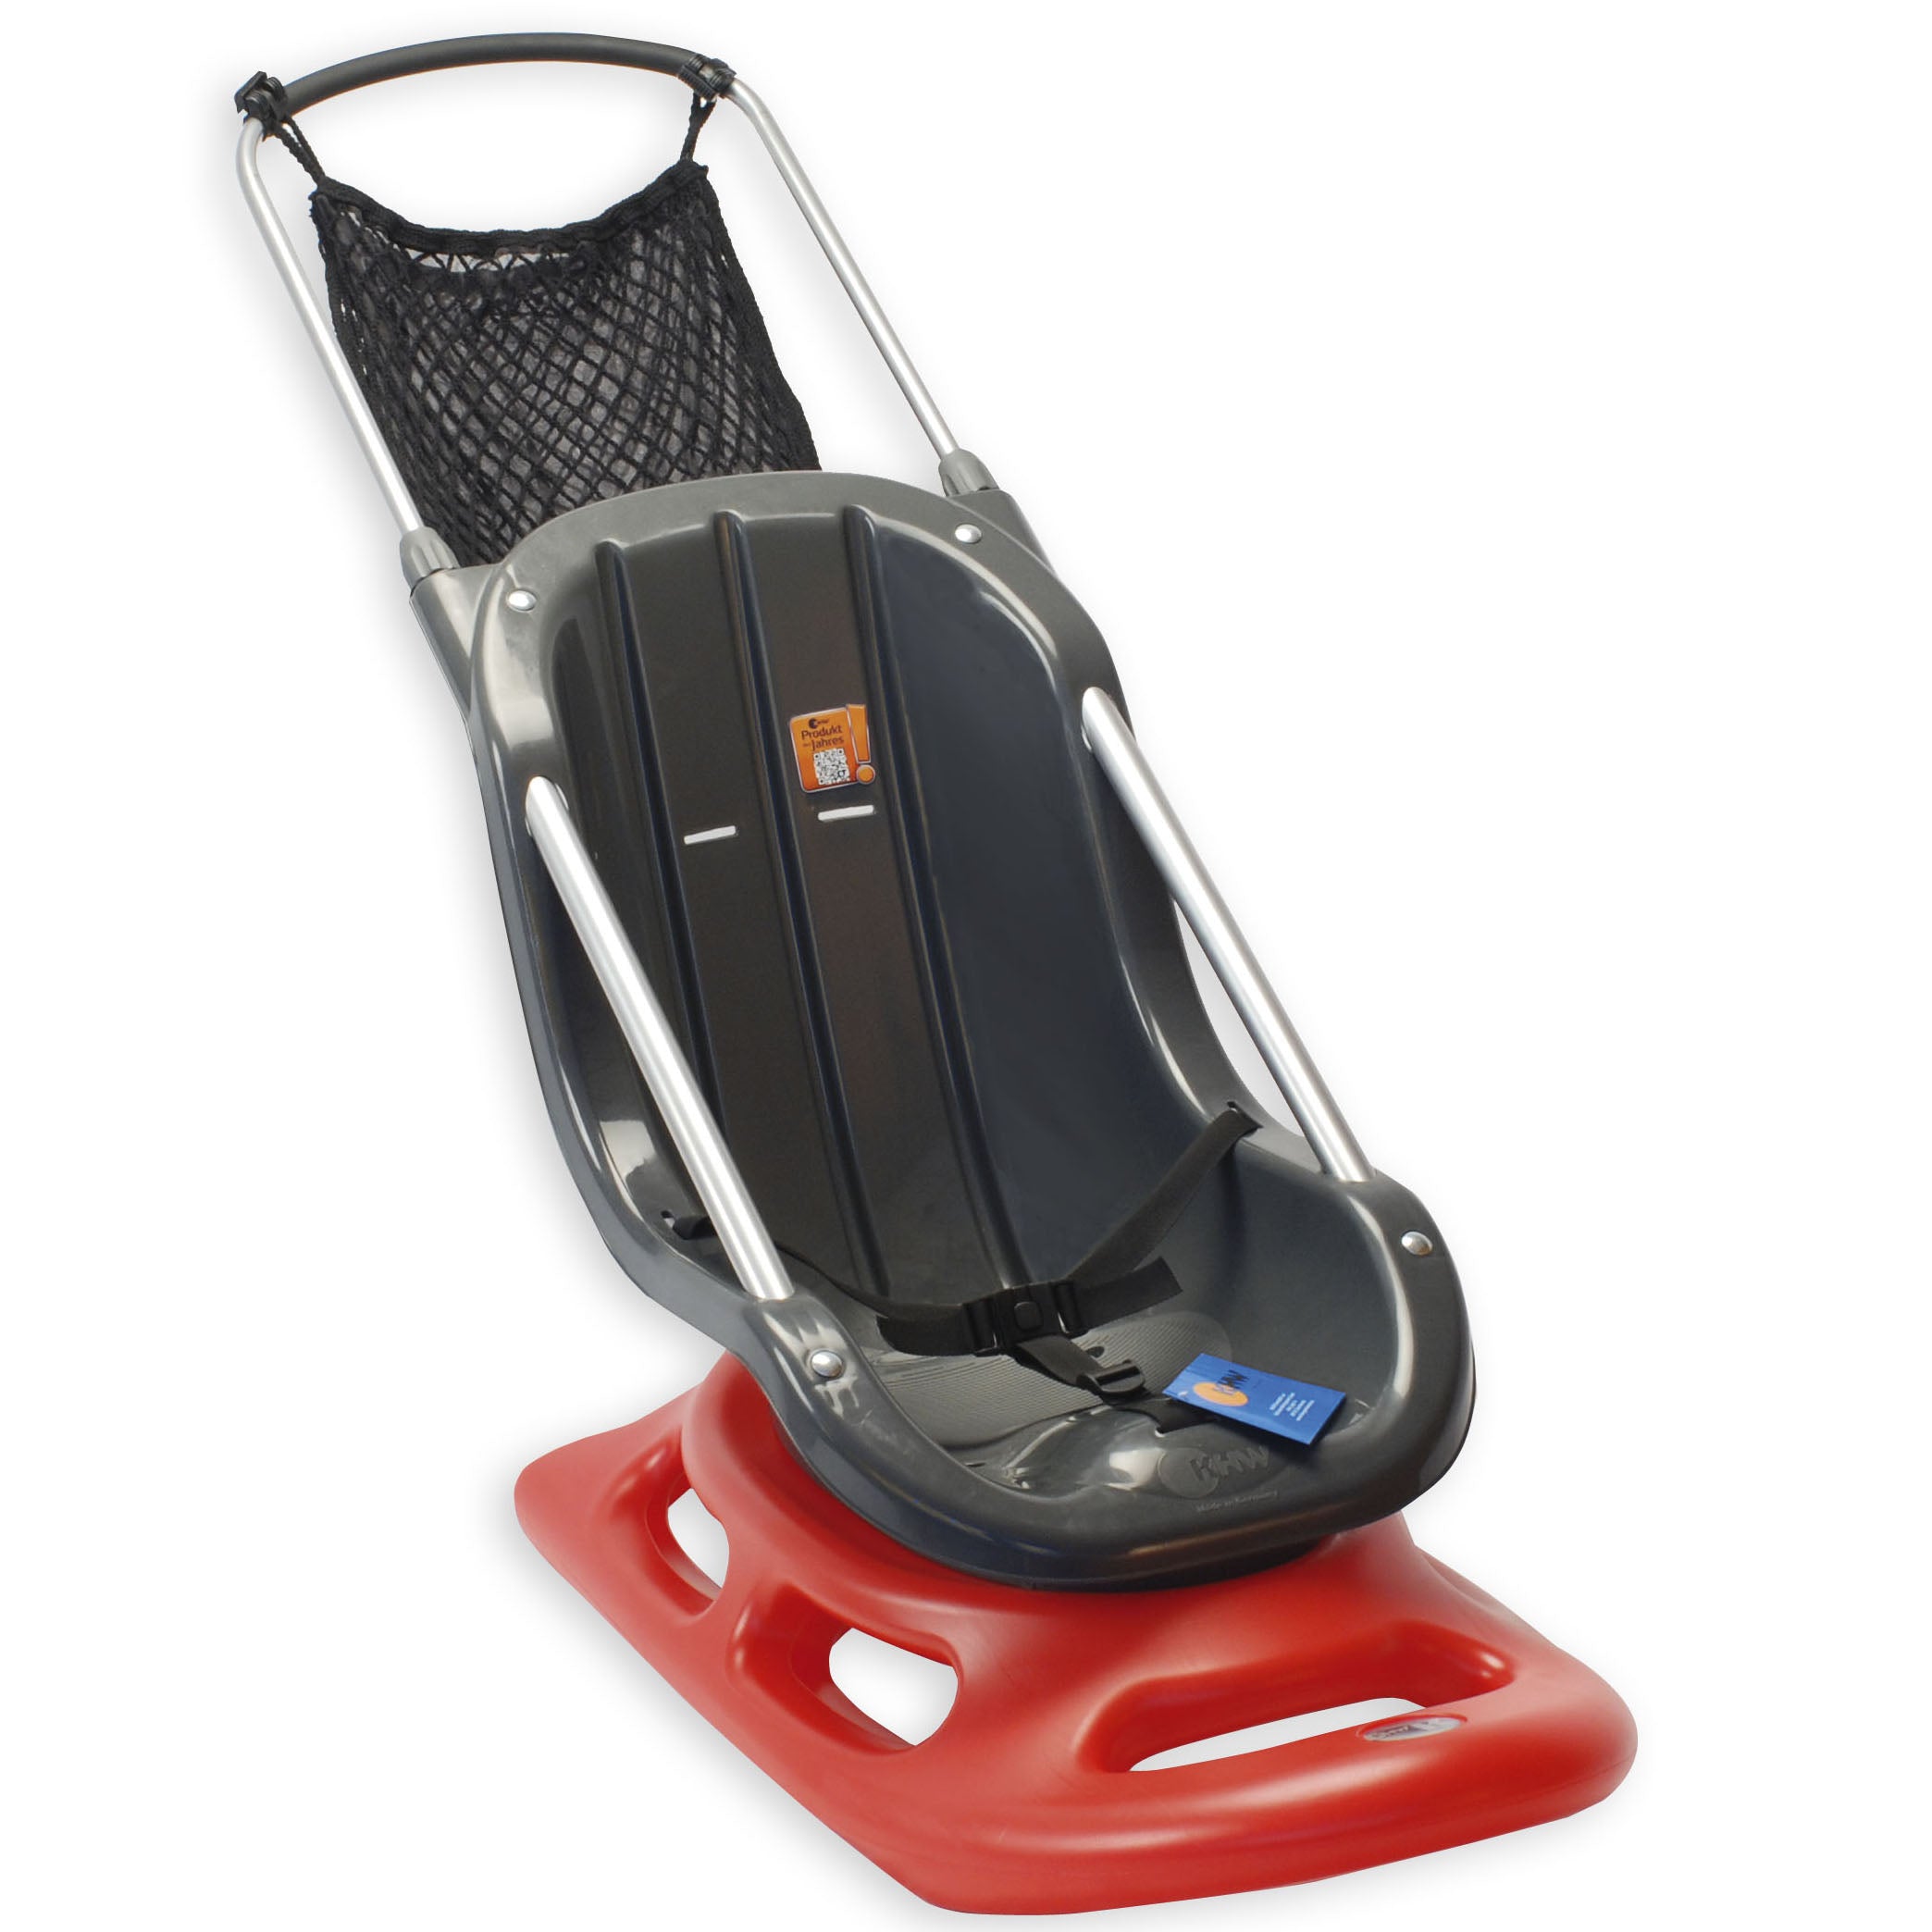 Snow stroller on sled for pushing baby or toddler in red